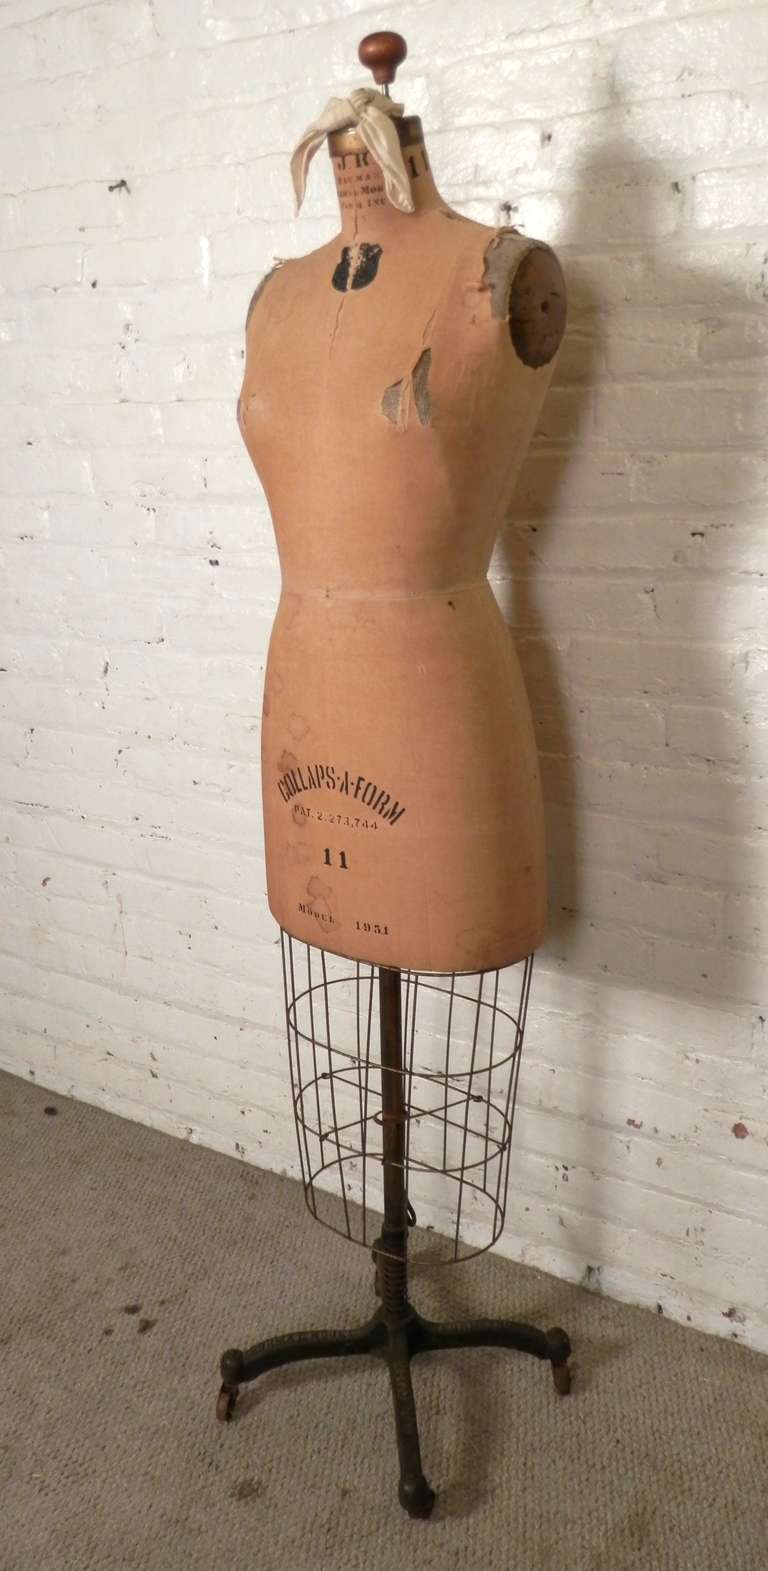 Vintage dress form from New York company Collaps-A-Form, made in 1951. Body has nice age to it, but still retains original tags and patent information. On casters for easy mobility.

(Please confirm item location - NY or NJ - with dealer)